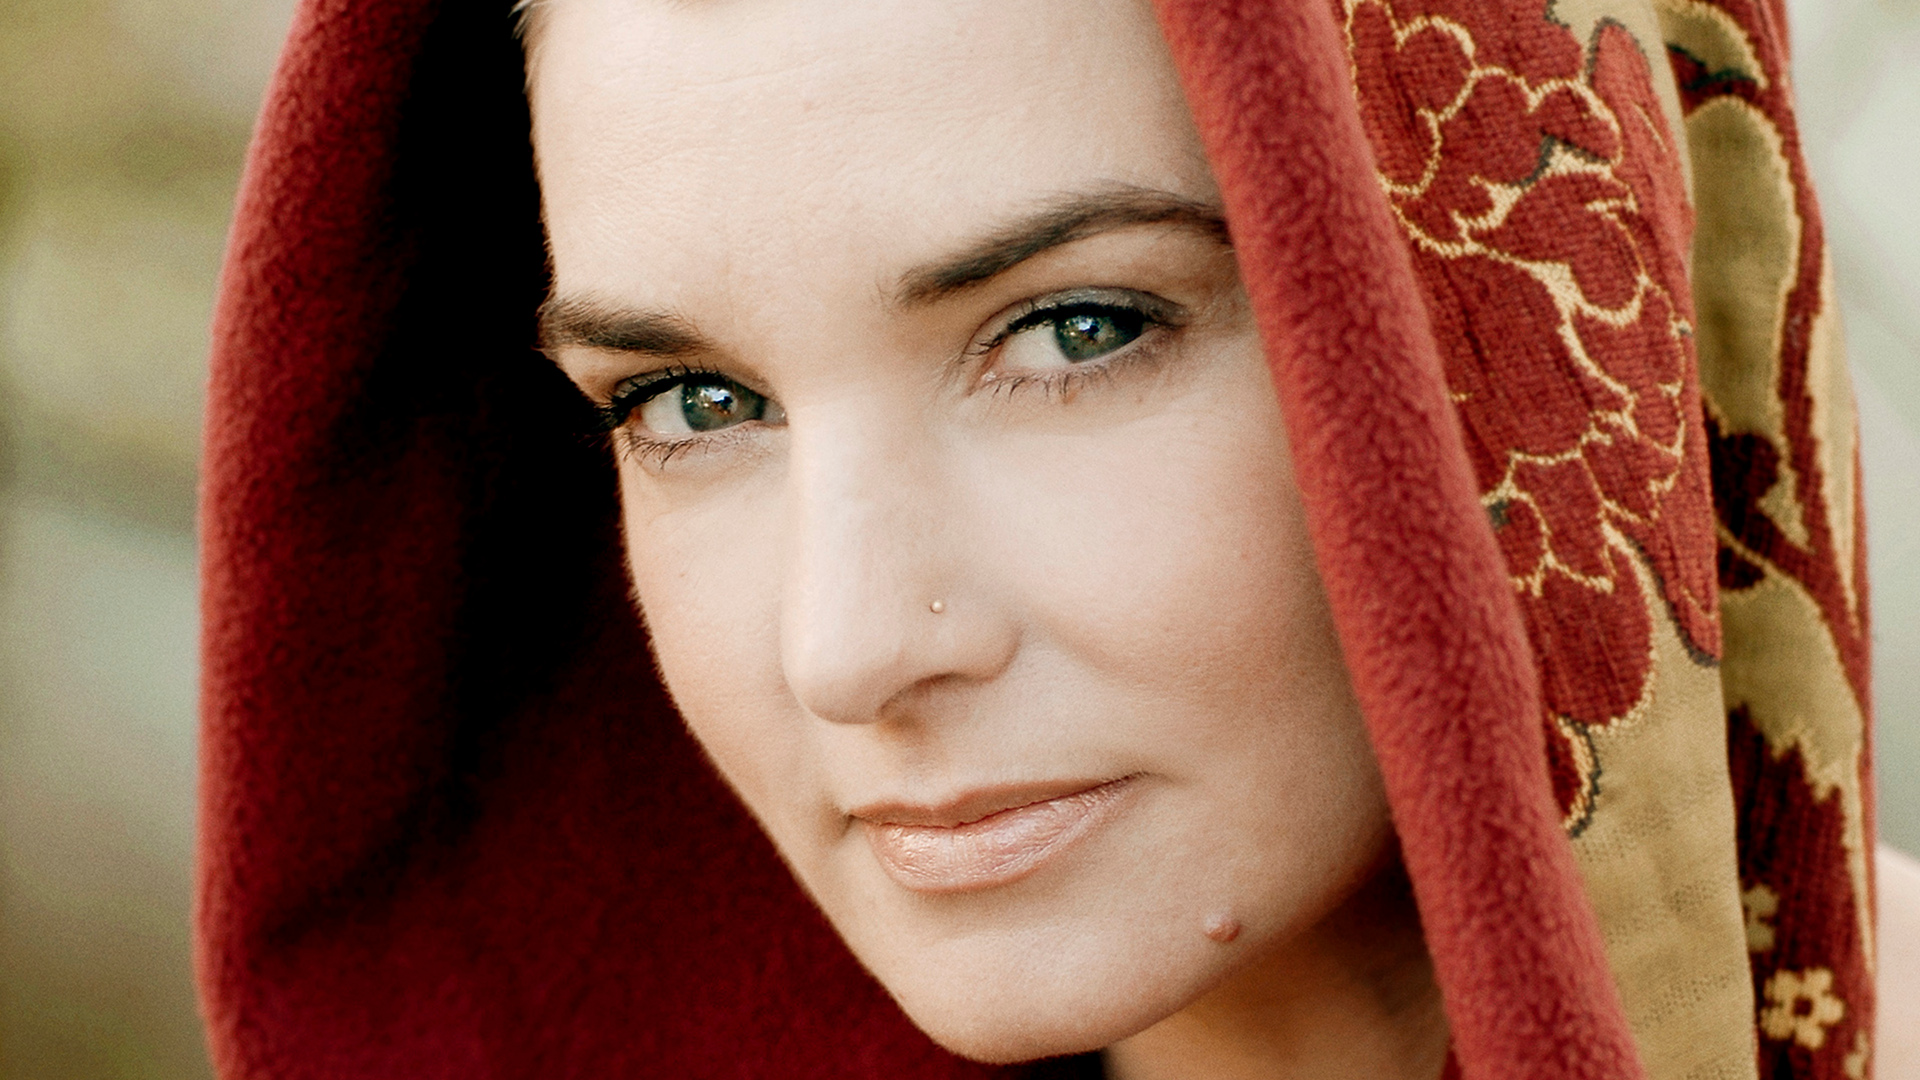 You Made Me The Thief Of Your Heart av Sinead O'connor